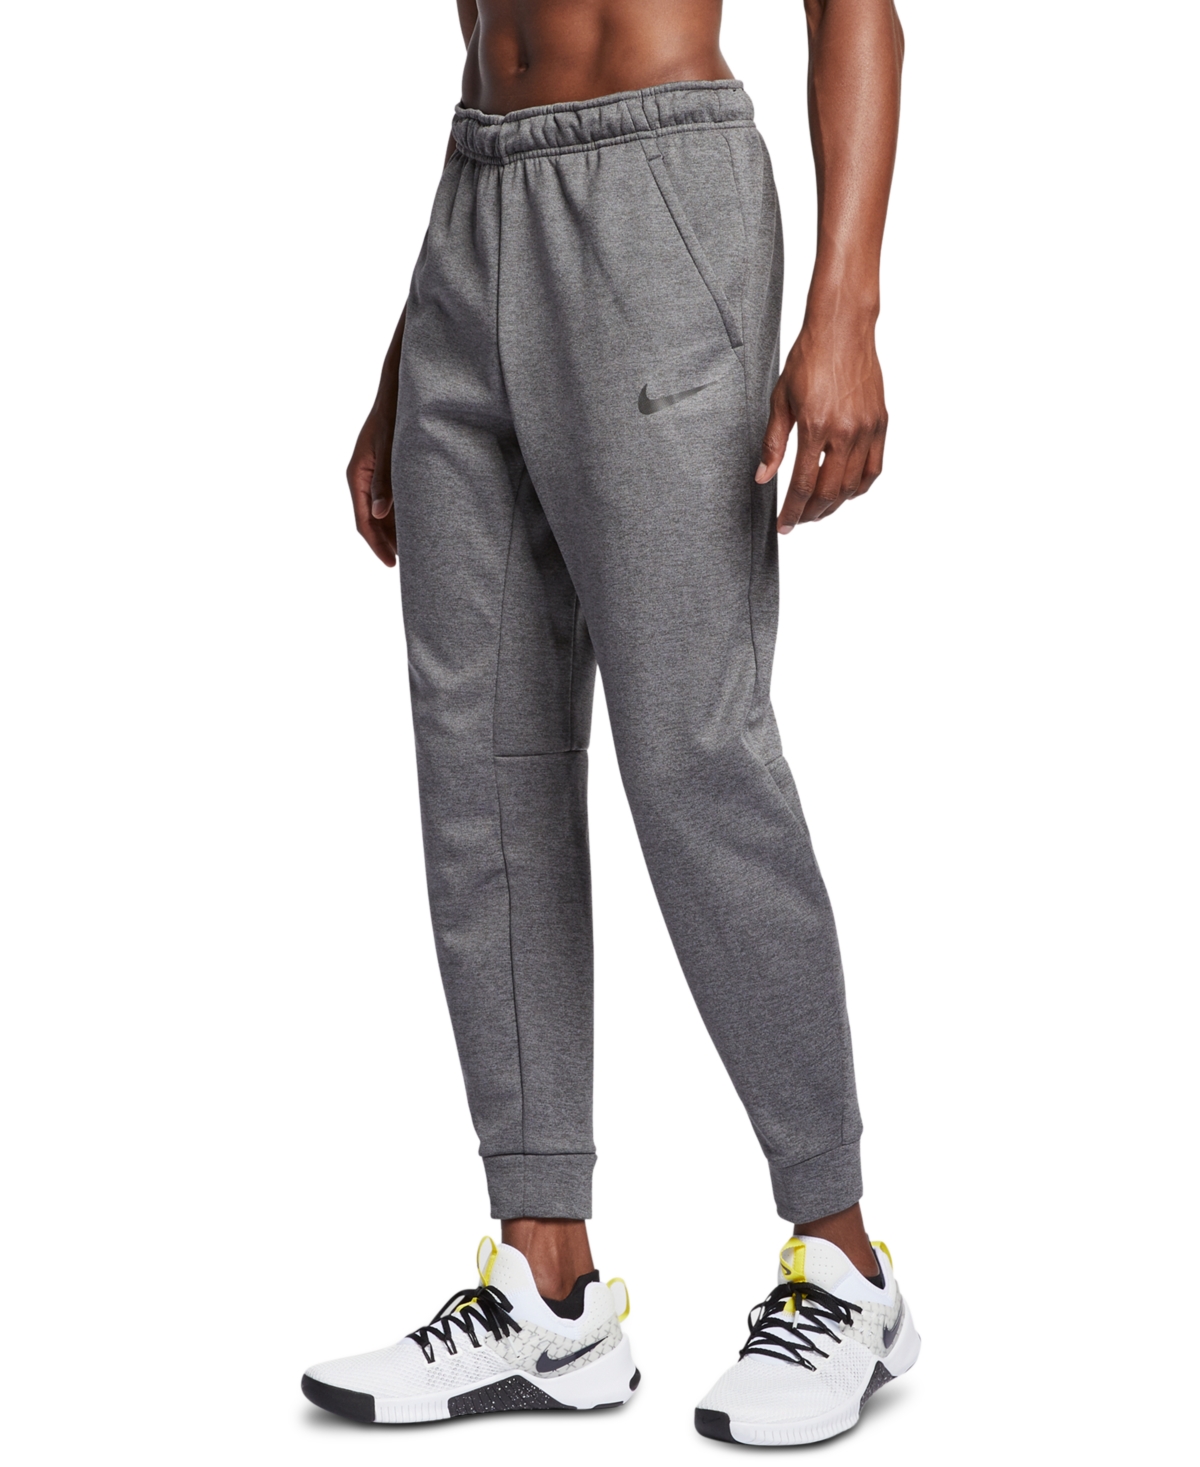 UPC 886668341323 product image for Nike Men's Therma Tapered Training Pants | upcitemdb.com